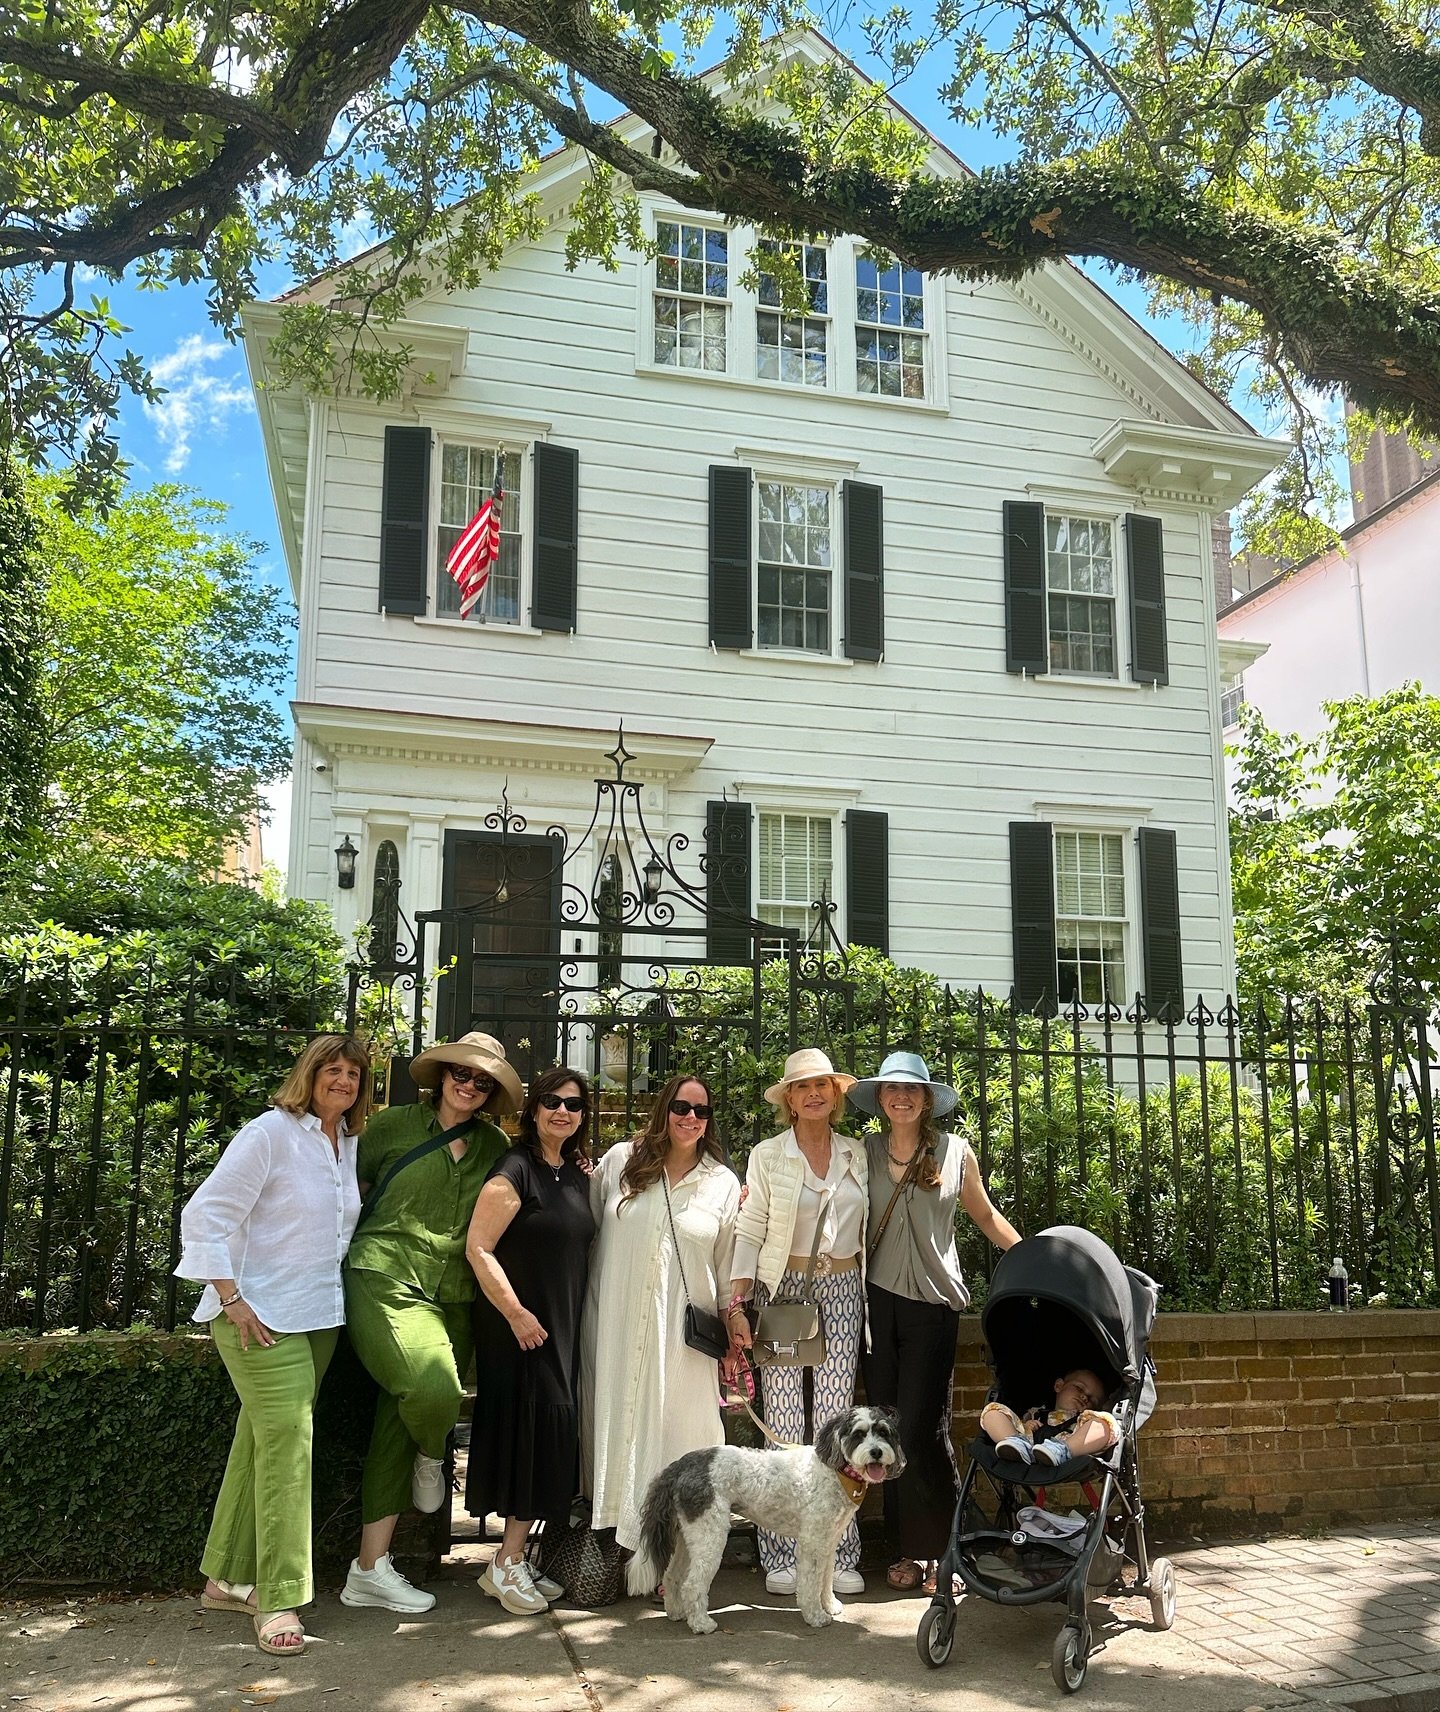 Have we ever told you that we L❤️VE our job! Meeting new wonderful people (and doggos)✔️ The streets of downtown Charleston are our office ✔️ Getting our steps in and soaking in the outdoors ✔️ Making Charleston history relevant and fun ✔️ Thank you 